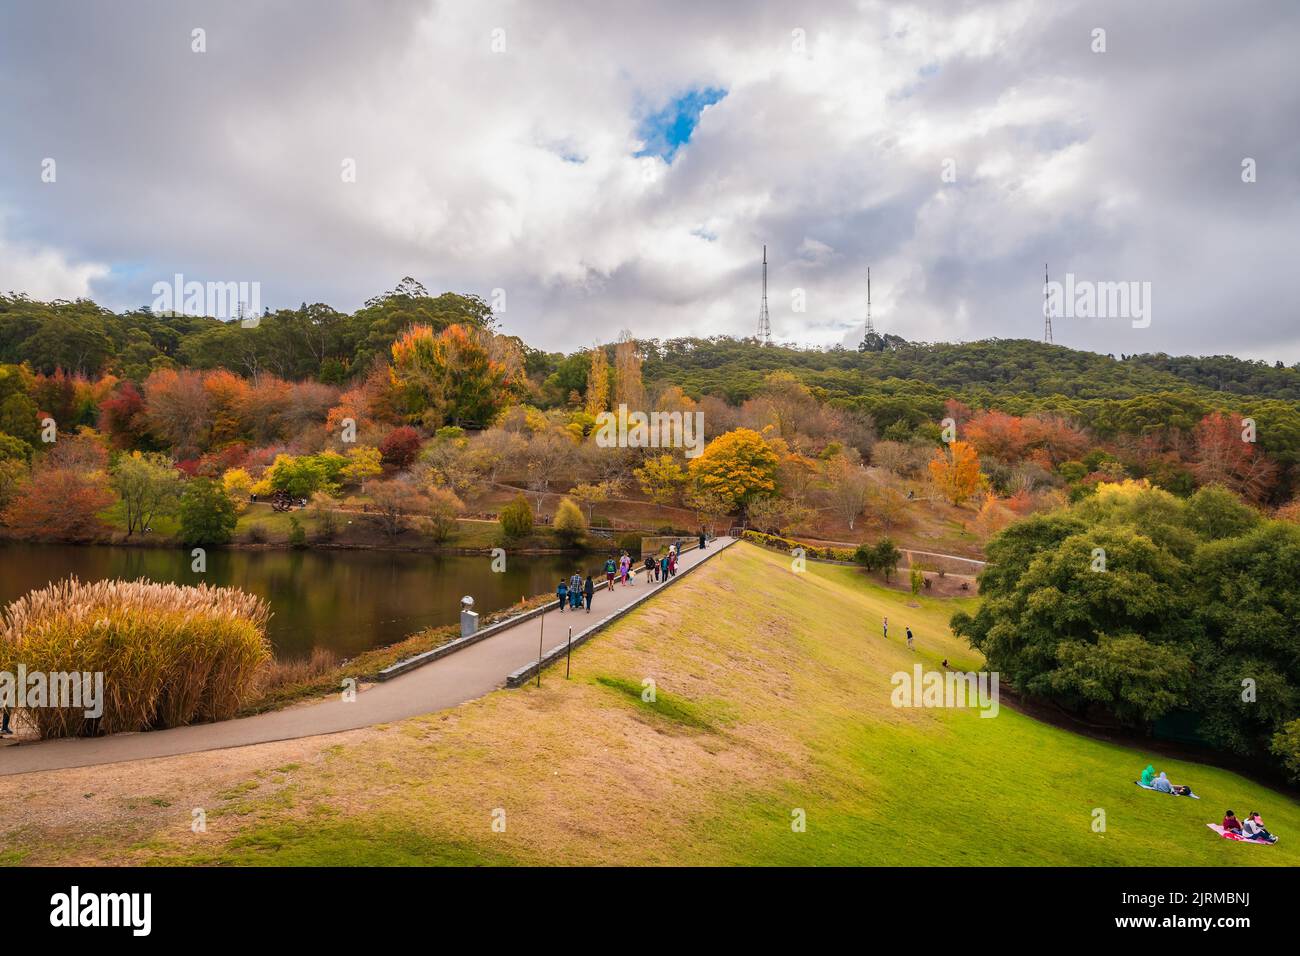 Crafers, South Australia - May 1, 2022: Mount Lofty Botanic Garden with people walking along the pond on a day during autumn season Stock Photo